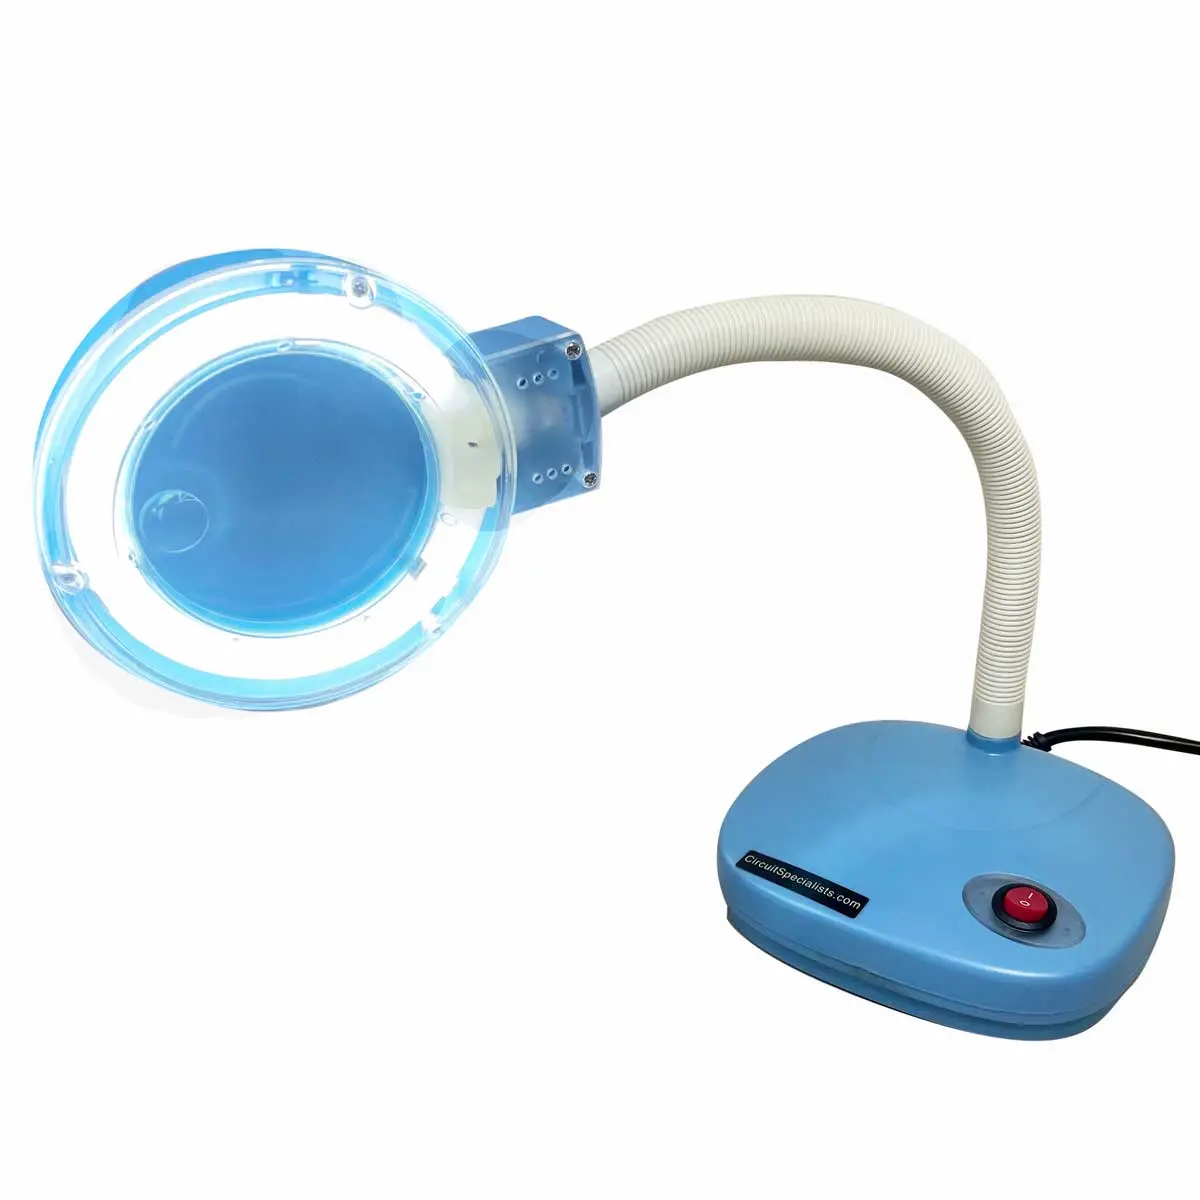 MAGNIFYING TABLE LAMP